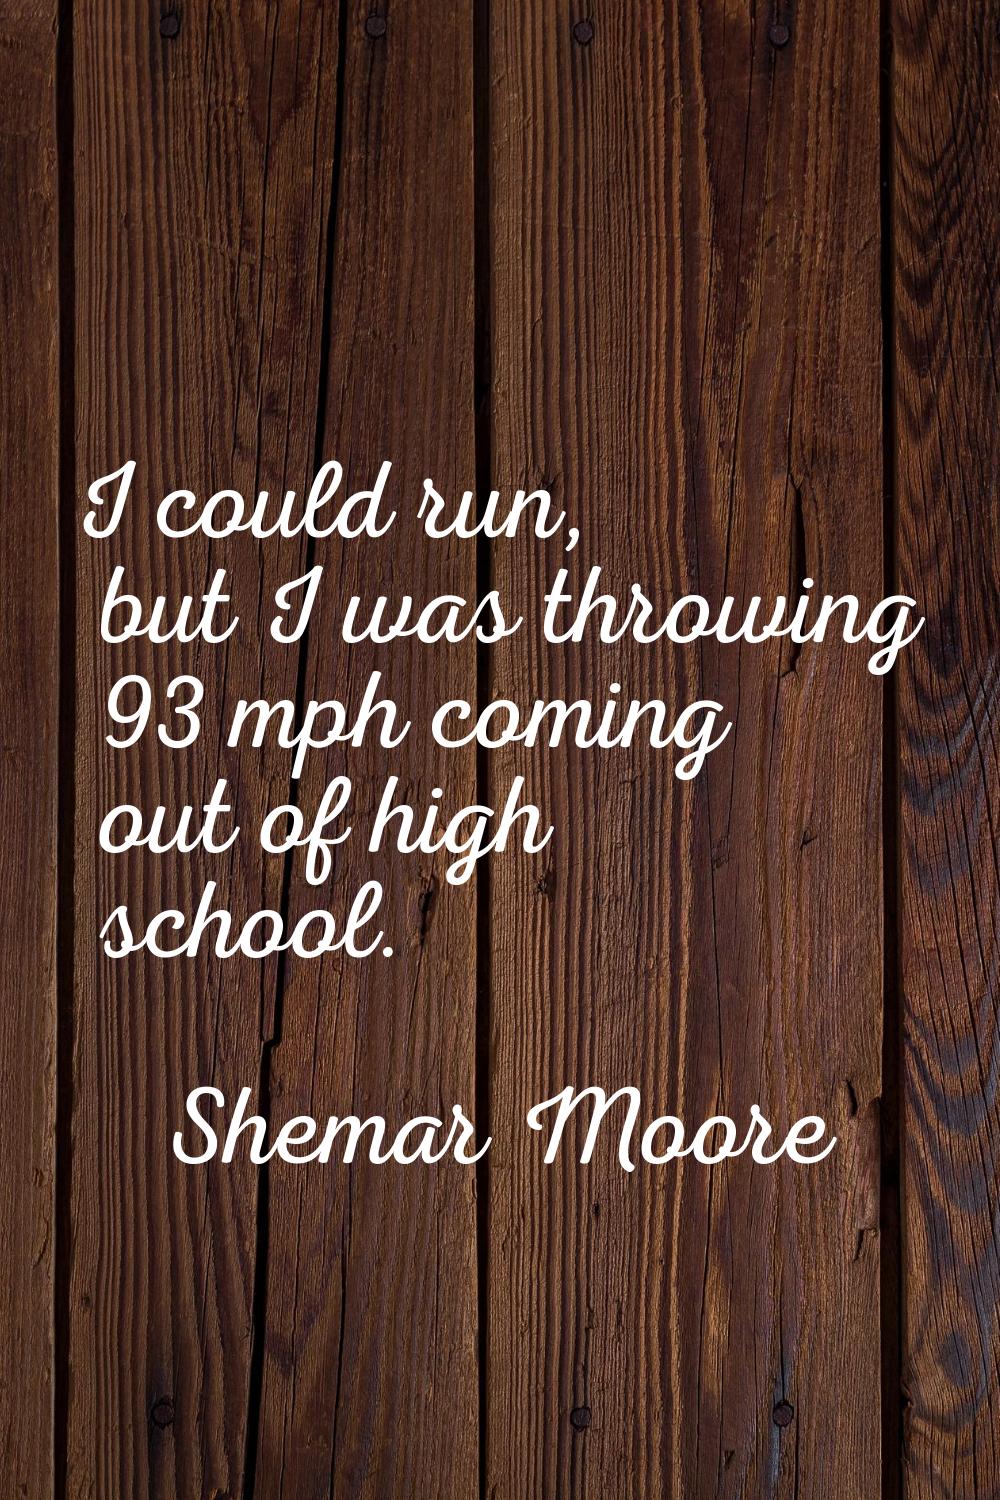 I could run, but I was throwing 93 mph coming out of high school.